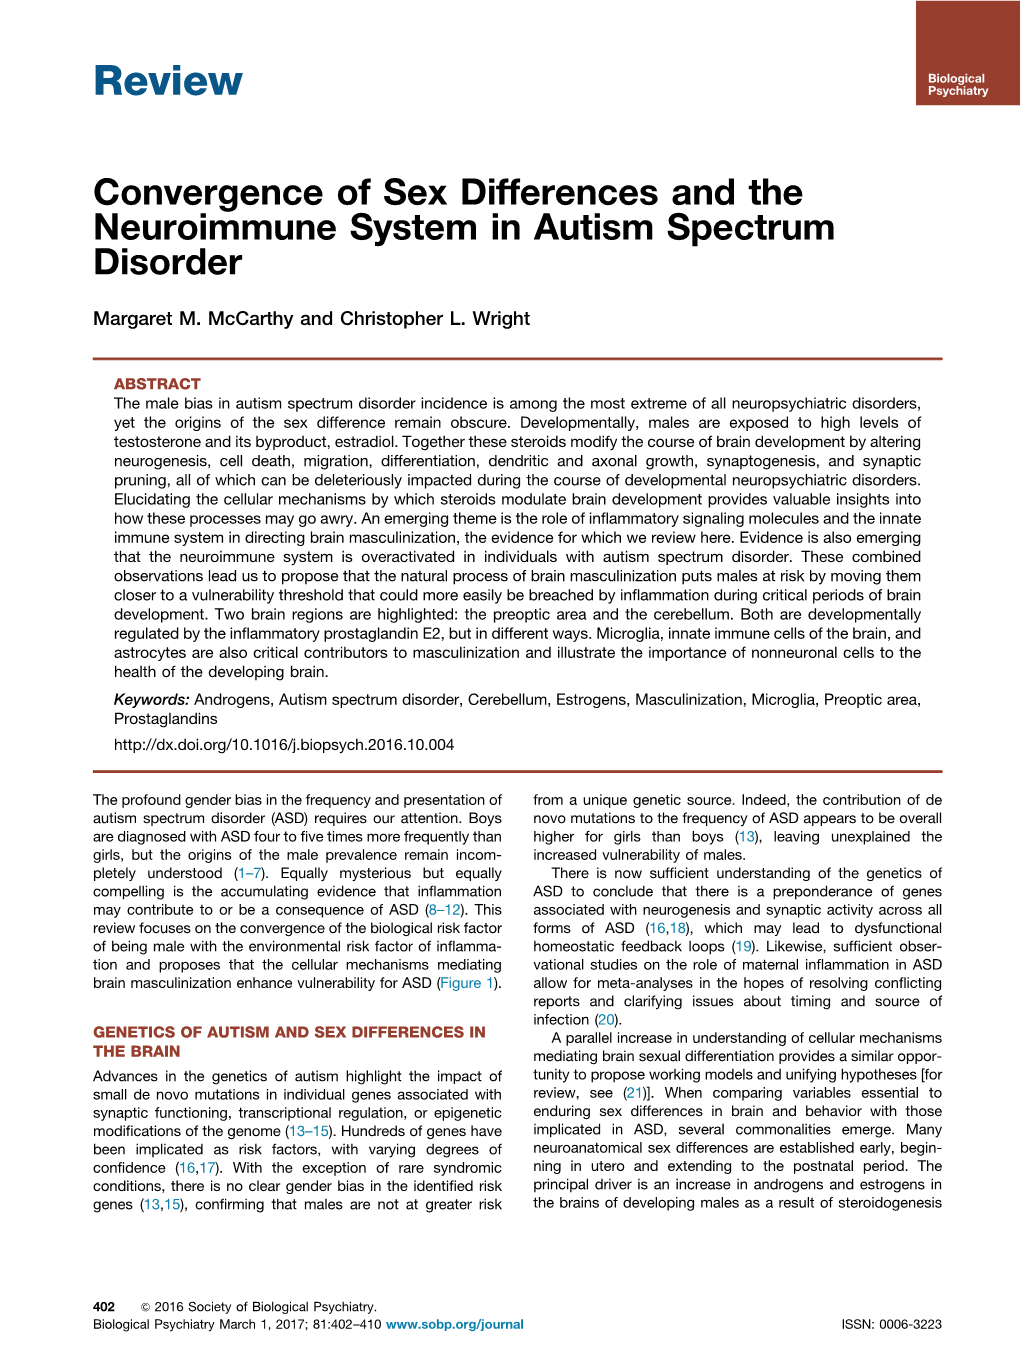 Convergence of Sex Differences and the Neuroimmune System in Autism Spectrum Disorder